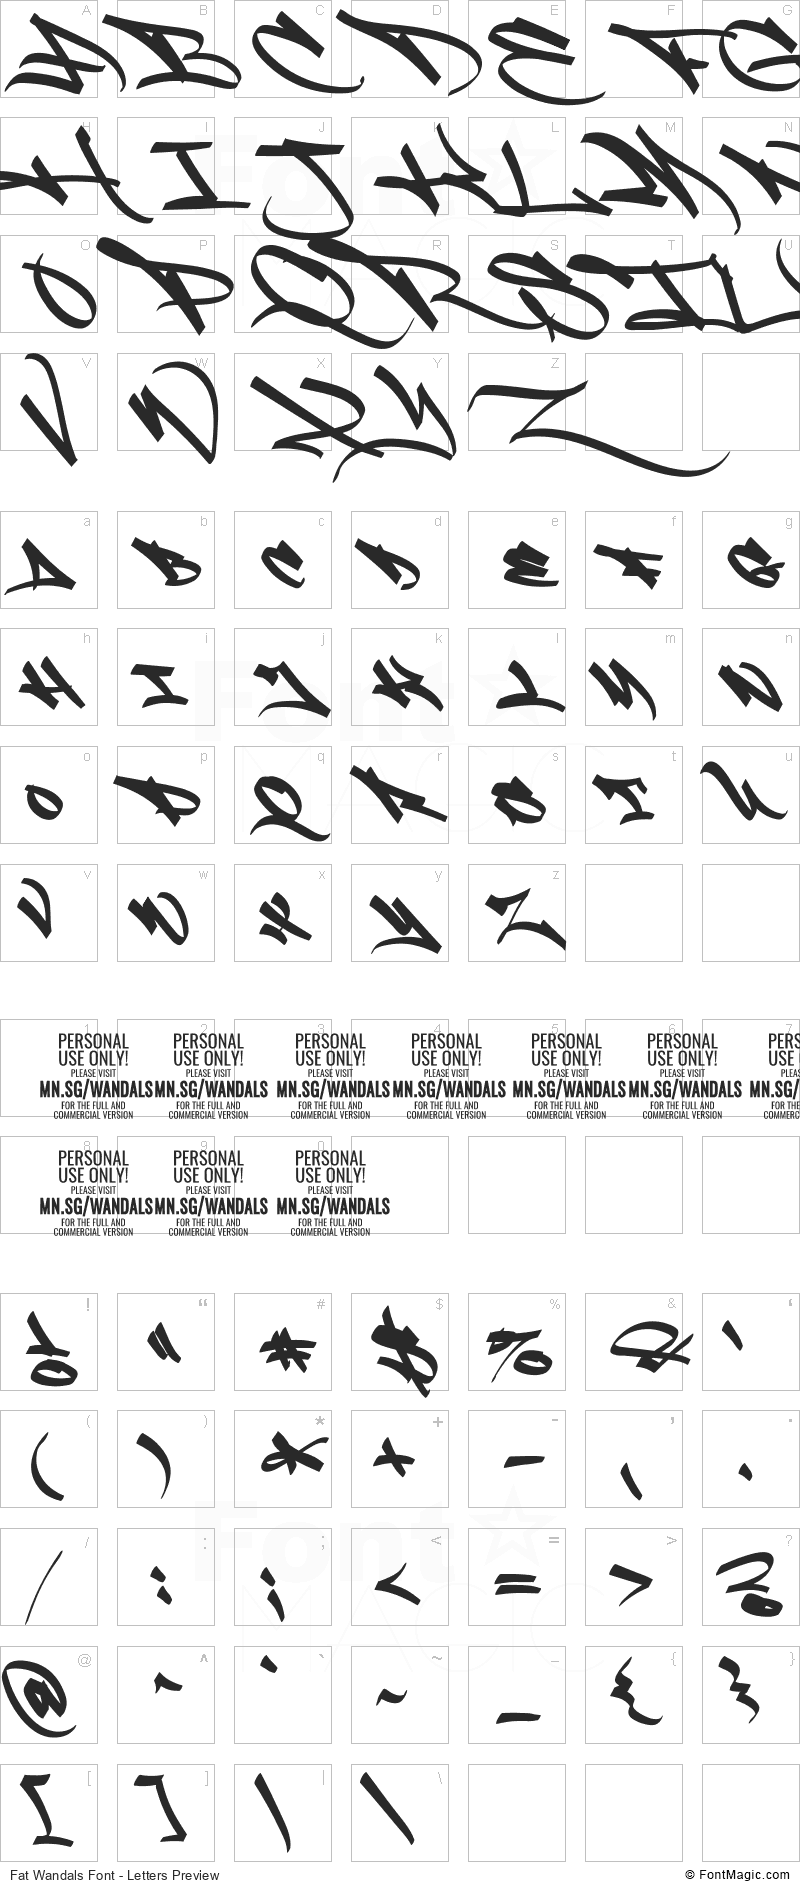 Fat Wandals Font - All Latters Preview Chart